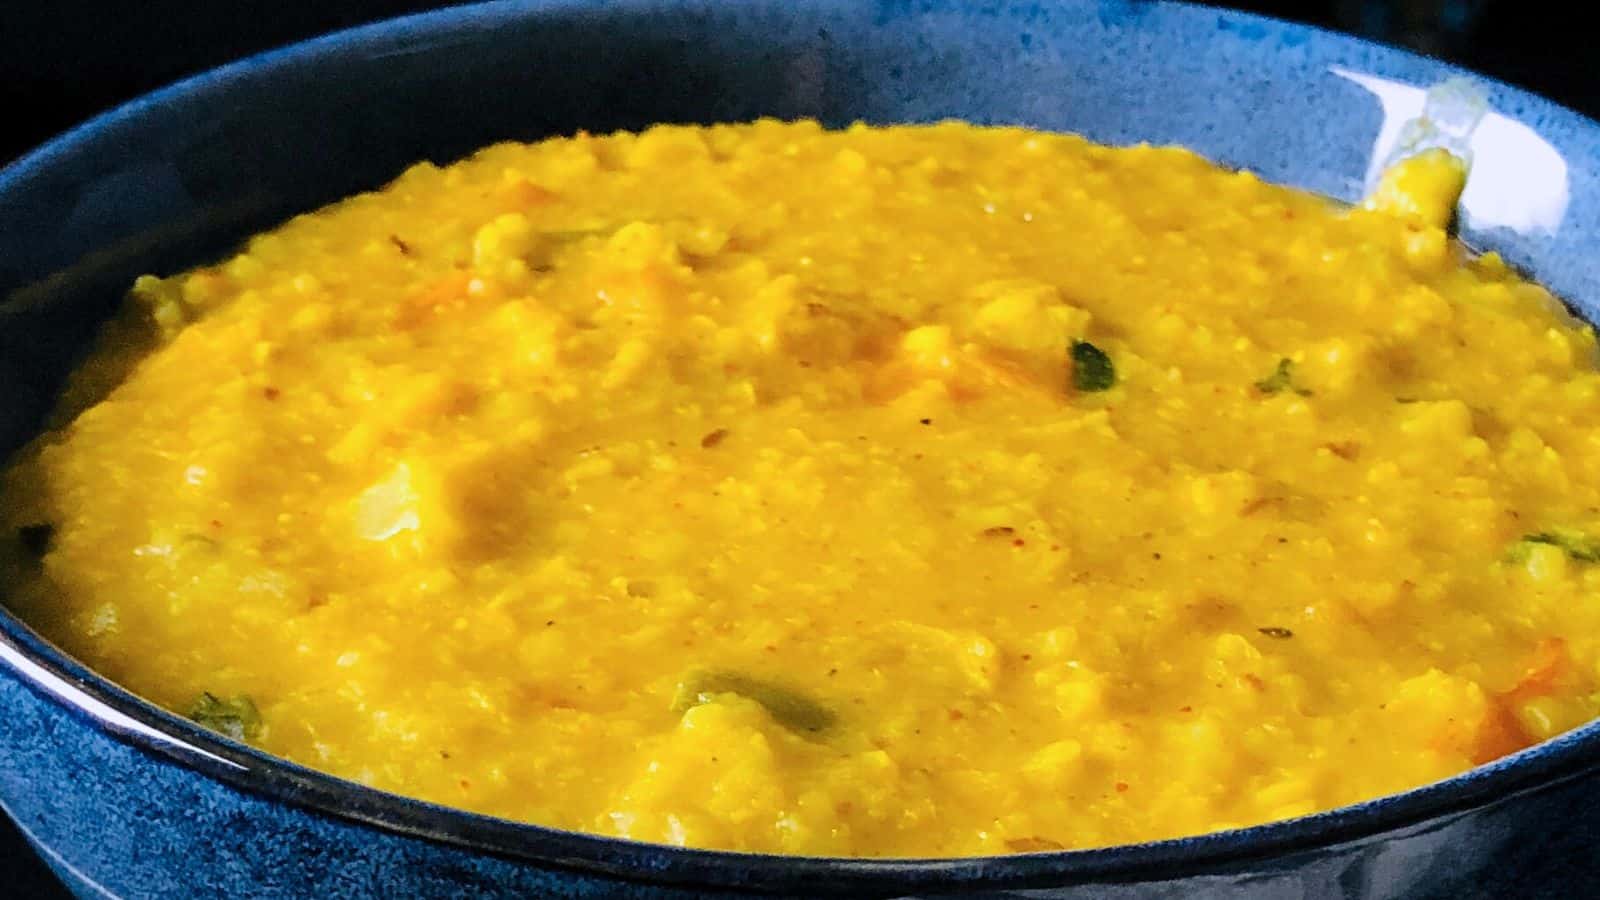 Dalia Khichdi served in a dark blue bowl with visible chunks of vegetables and spices.